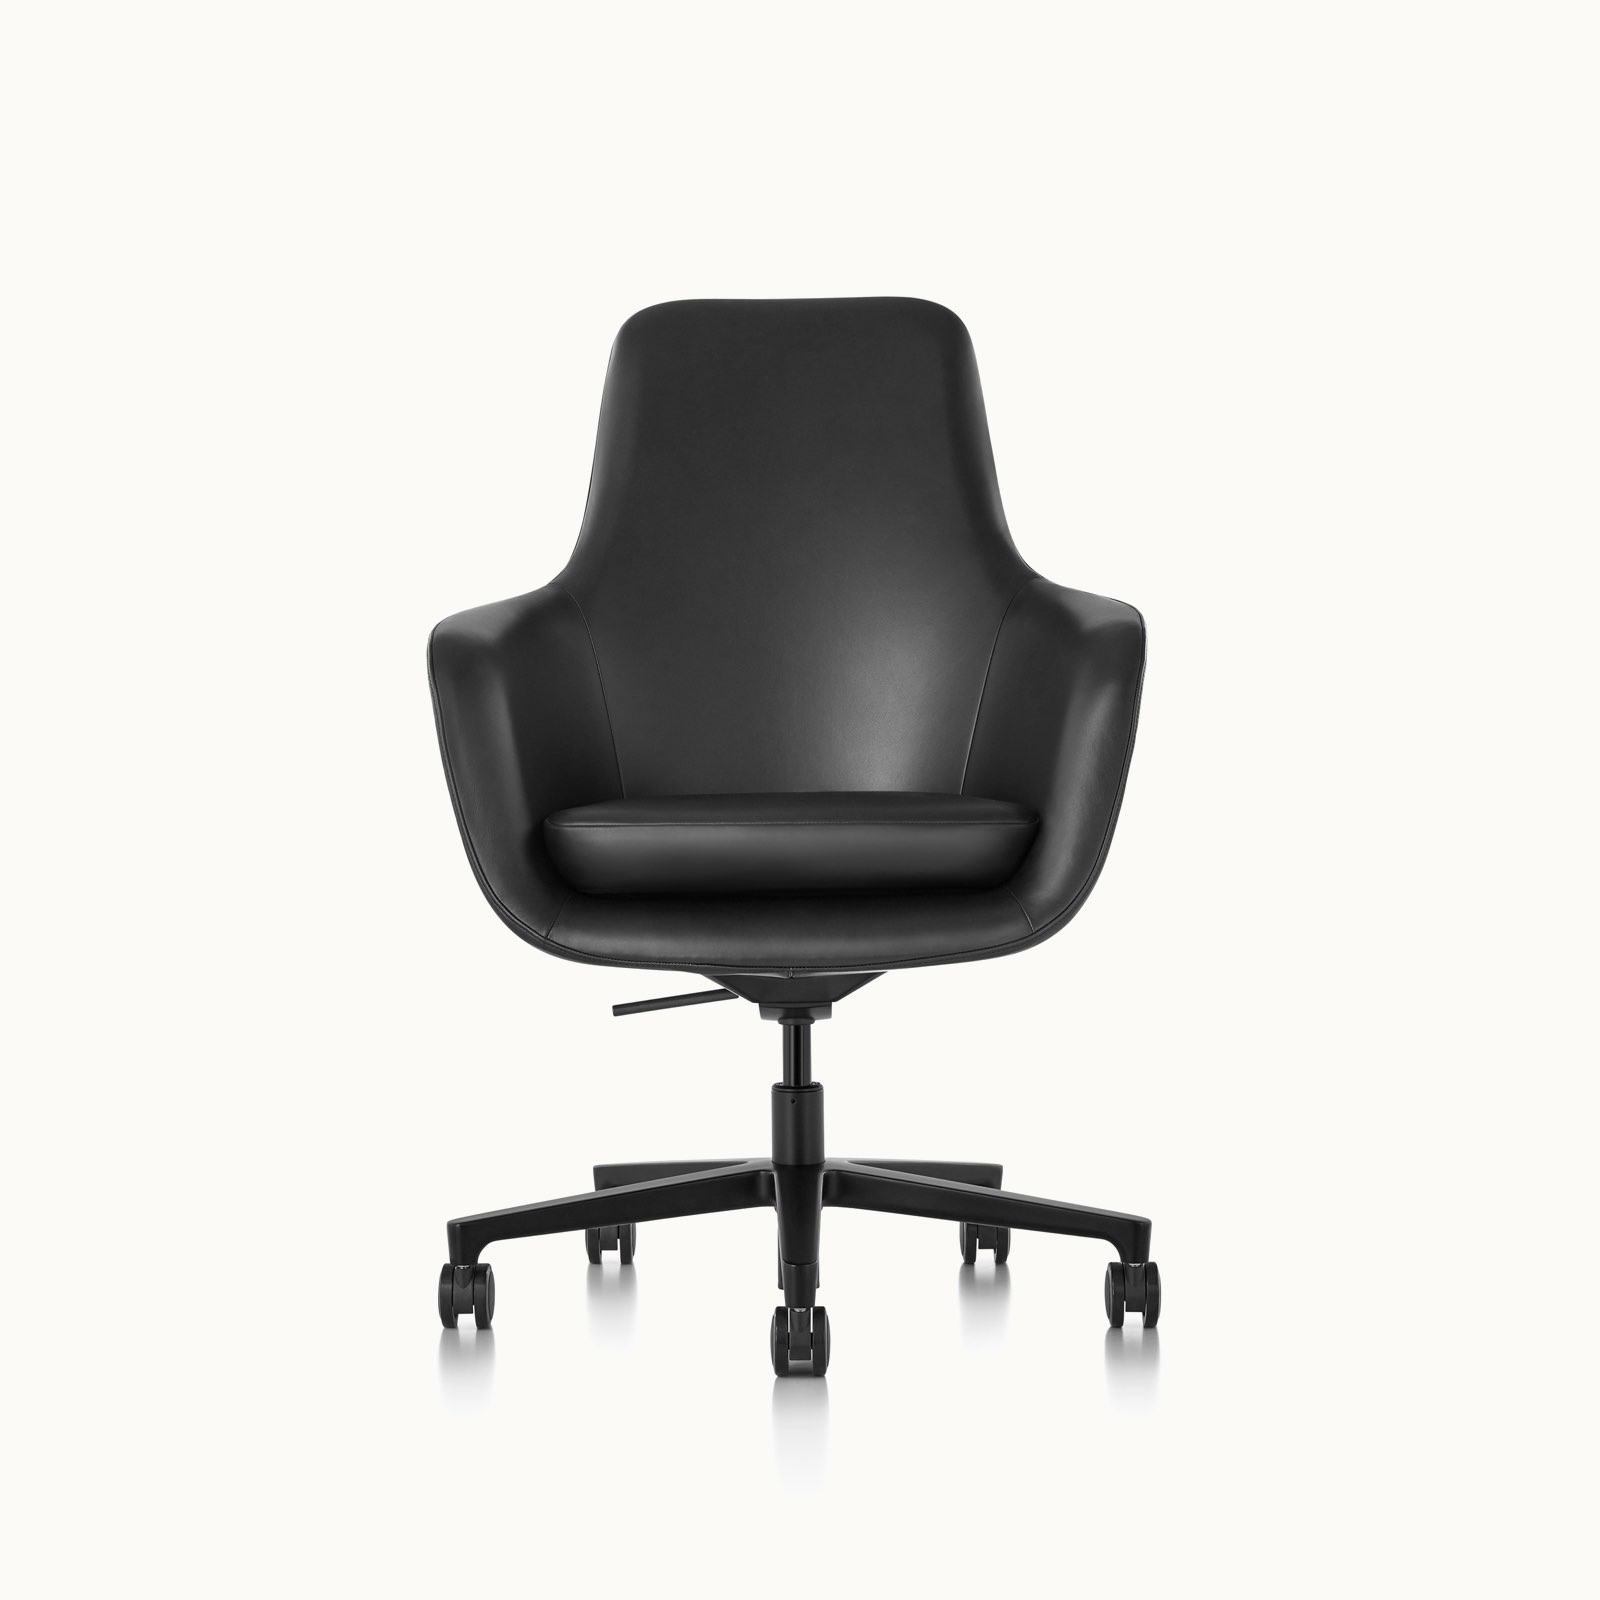 A high-back Saiba office chair with black leather upholstery and a five-star base, viewed from the front.